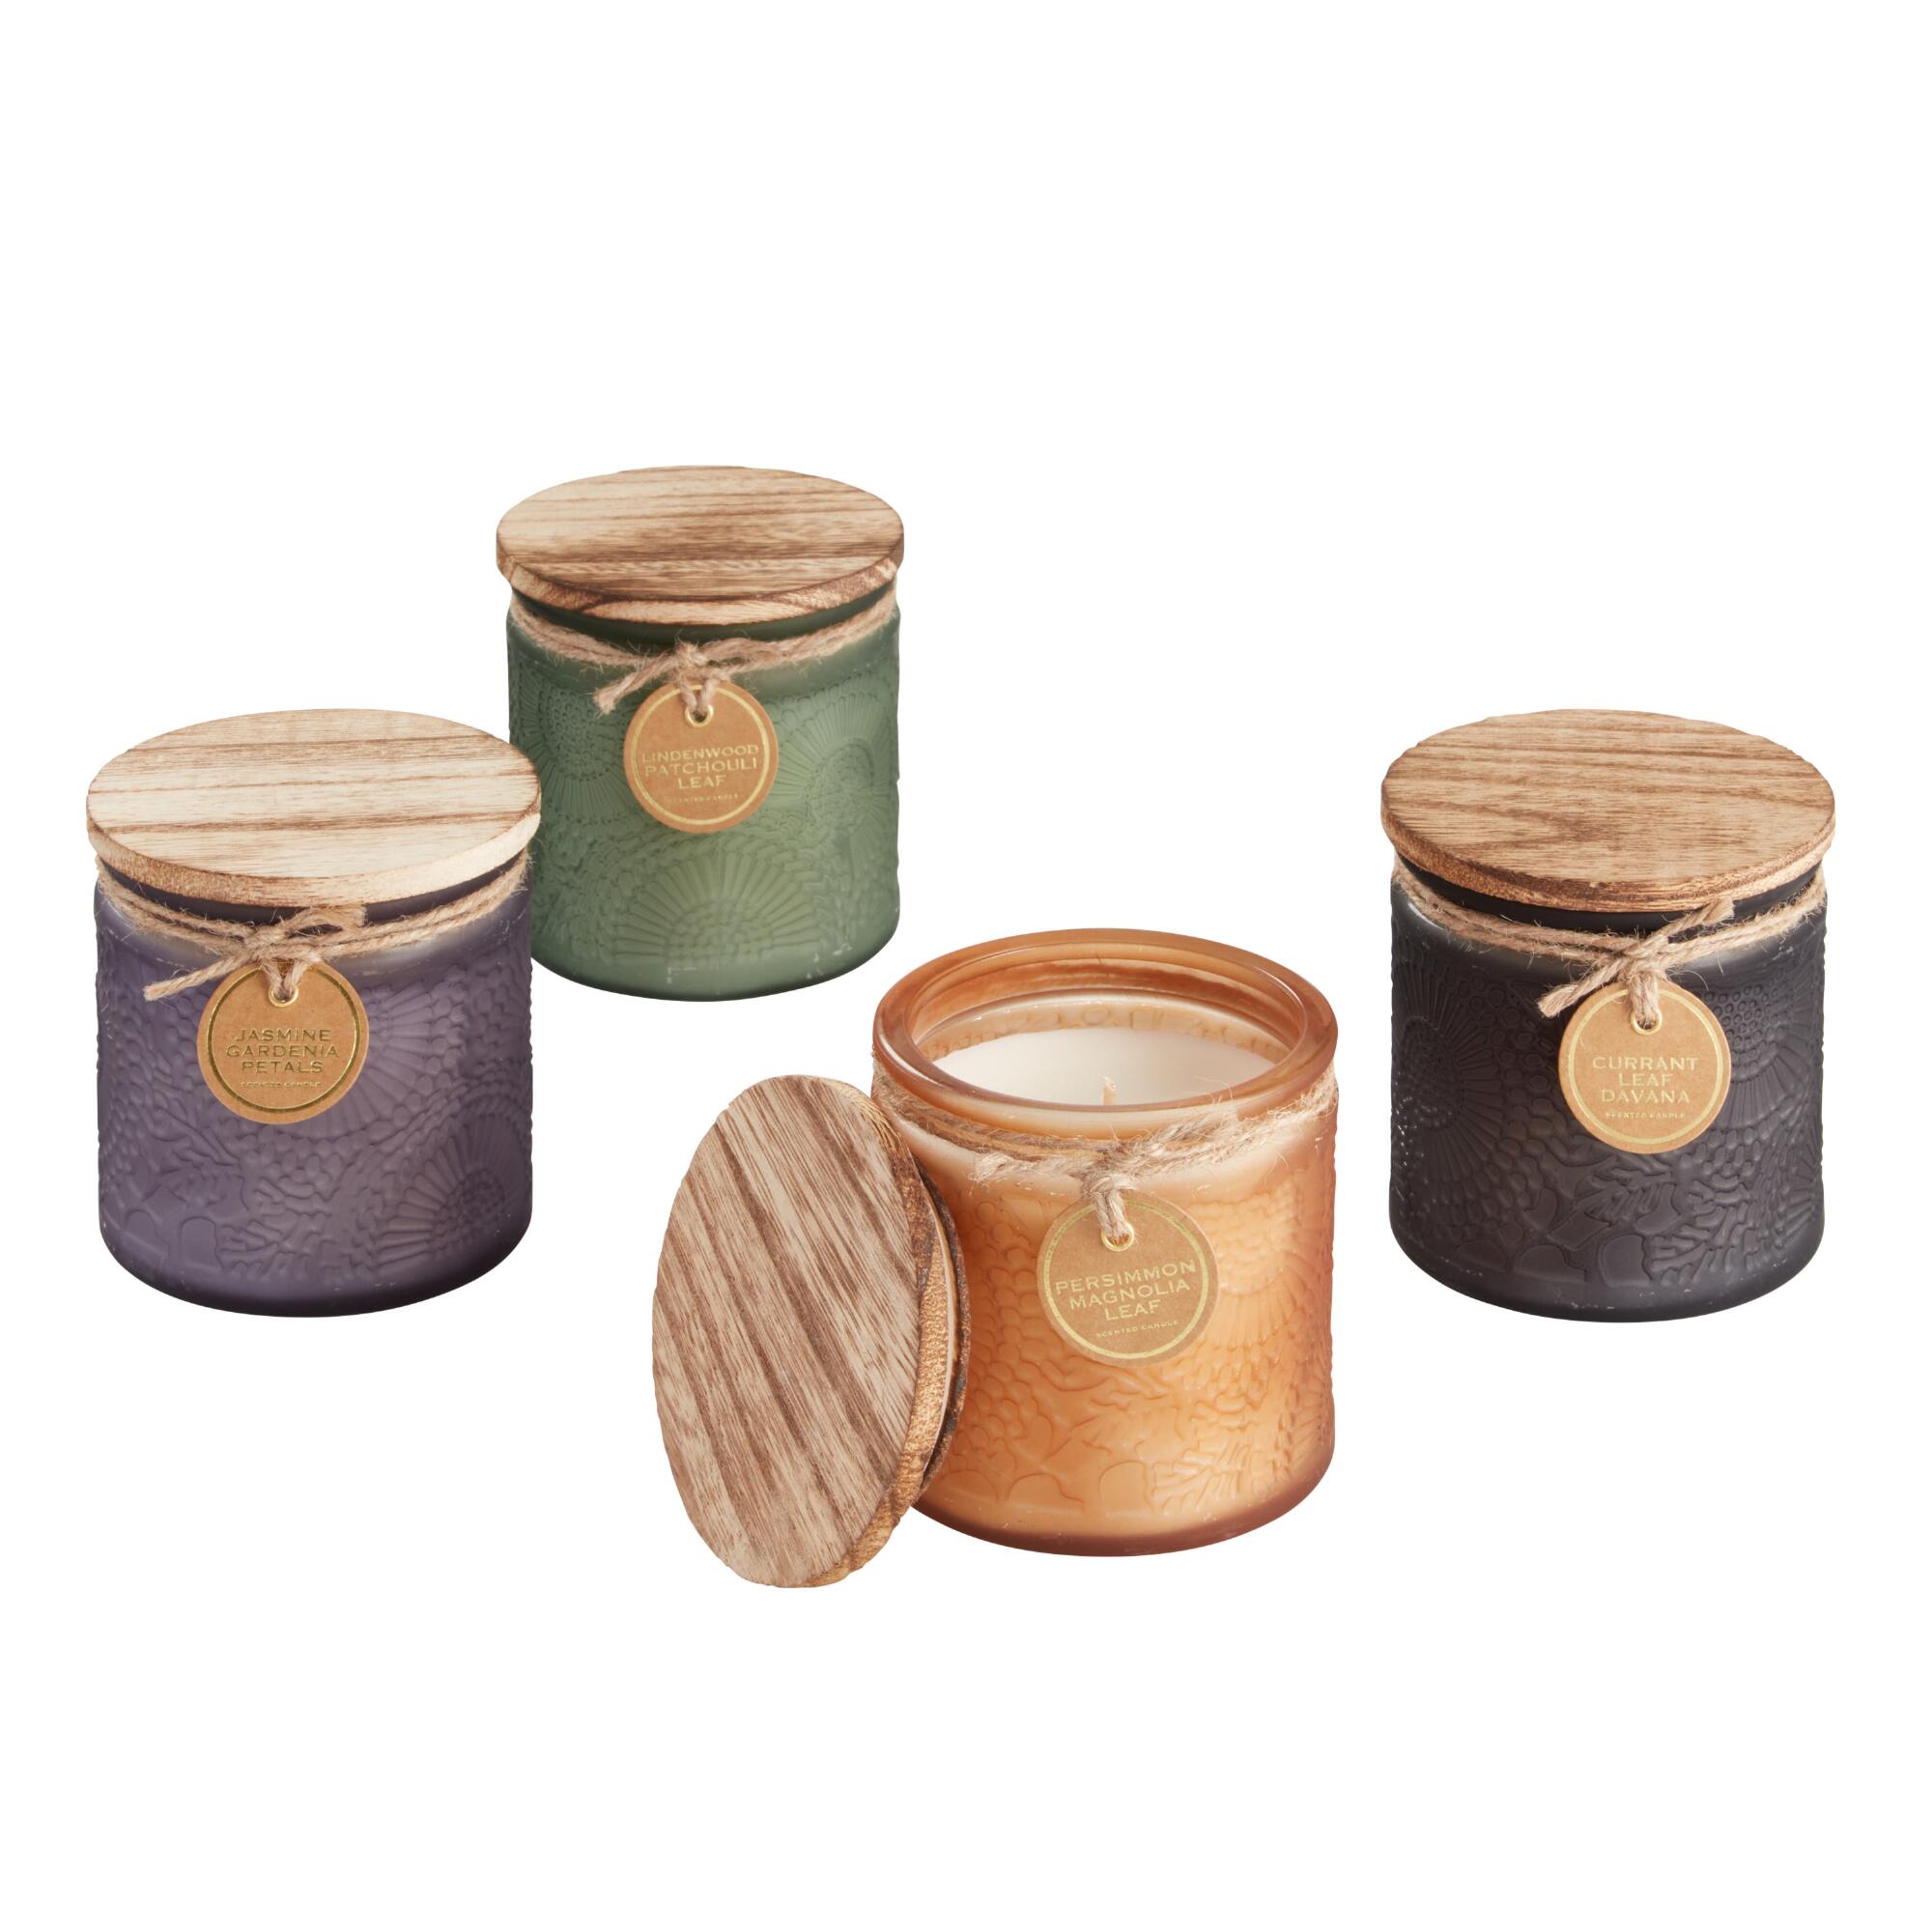 Embossed Medallion Filled Jar Candle Collection by World Market